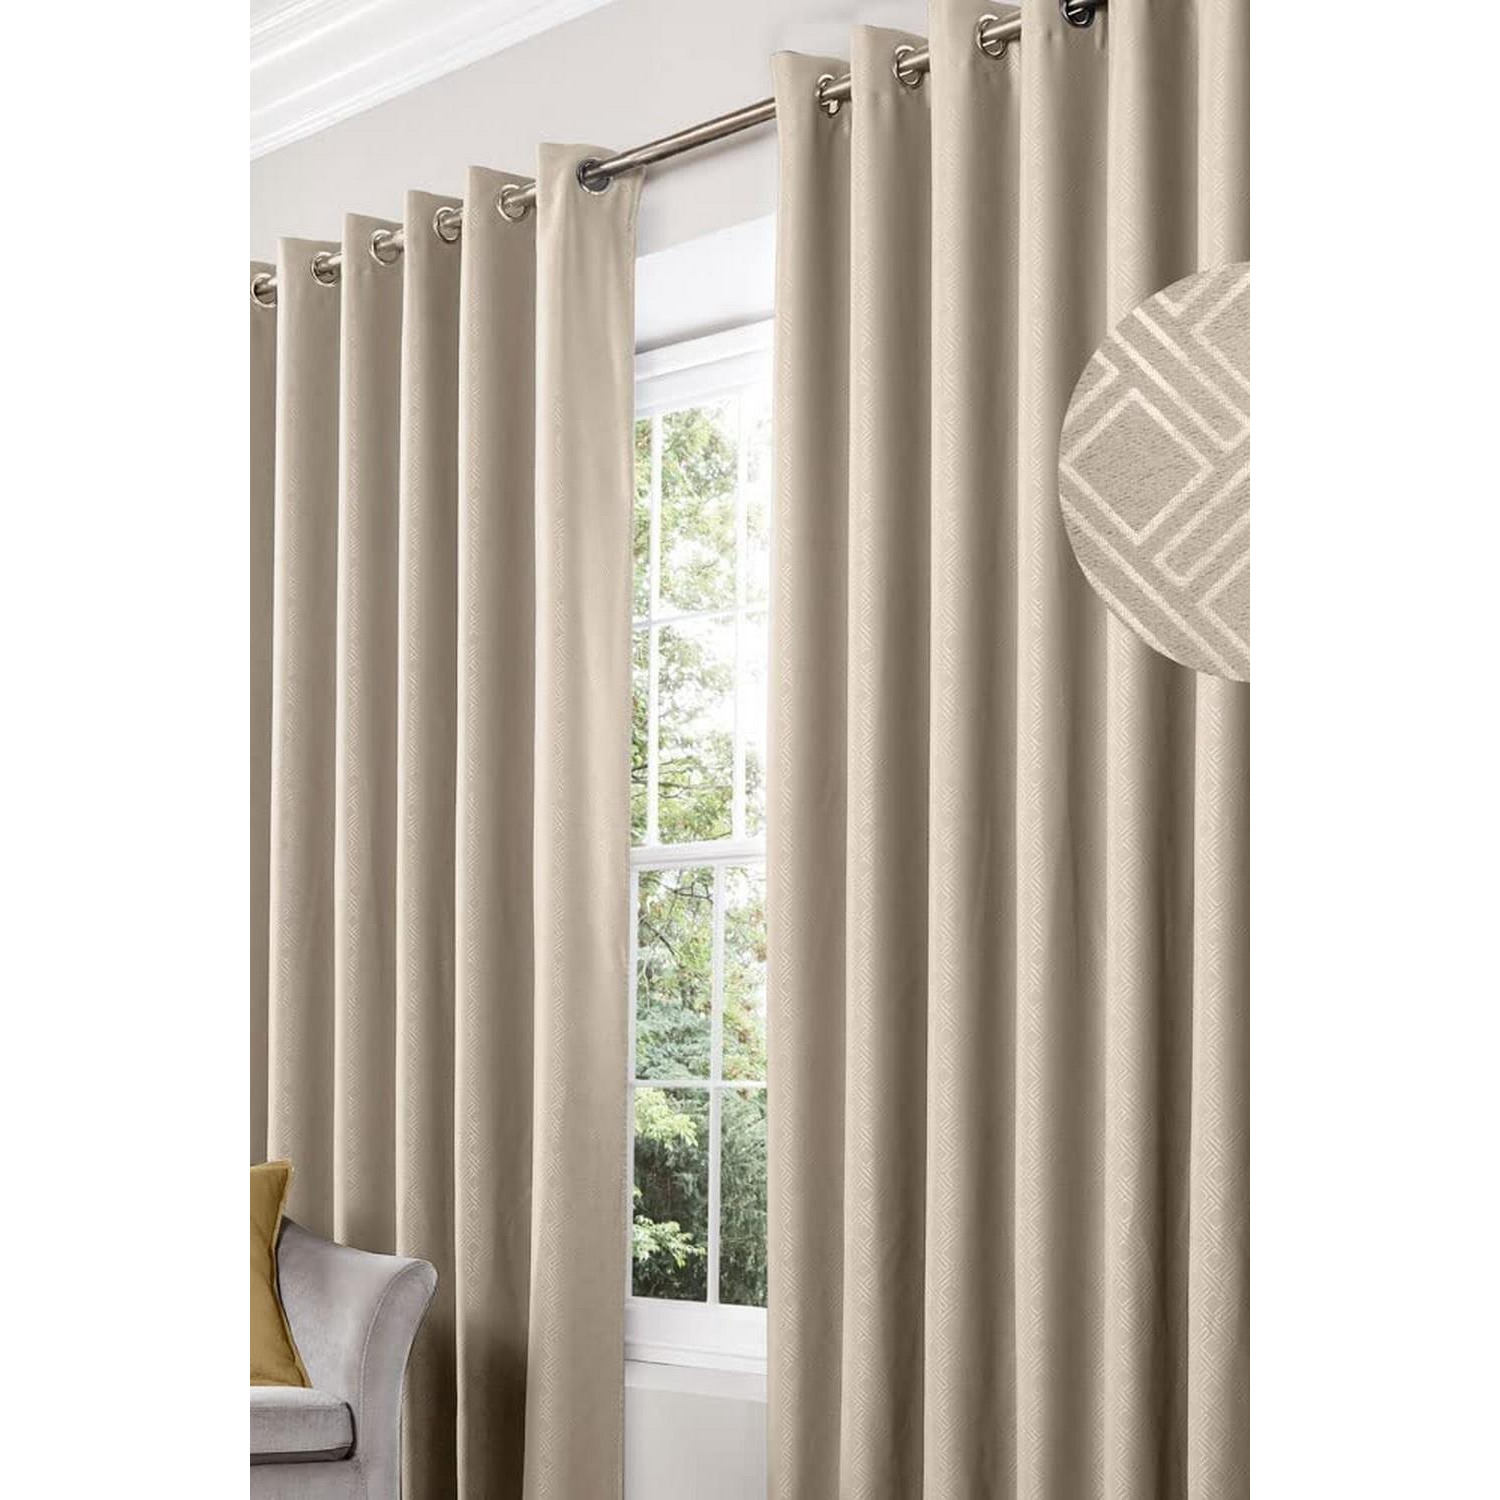 Diamond Blackout Eyelet Curtains Thermal Lined Ready Made Curtains - image 1